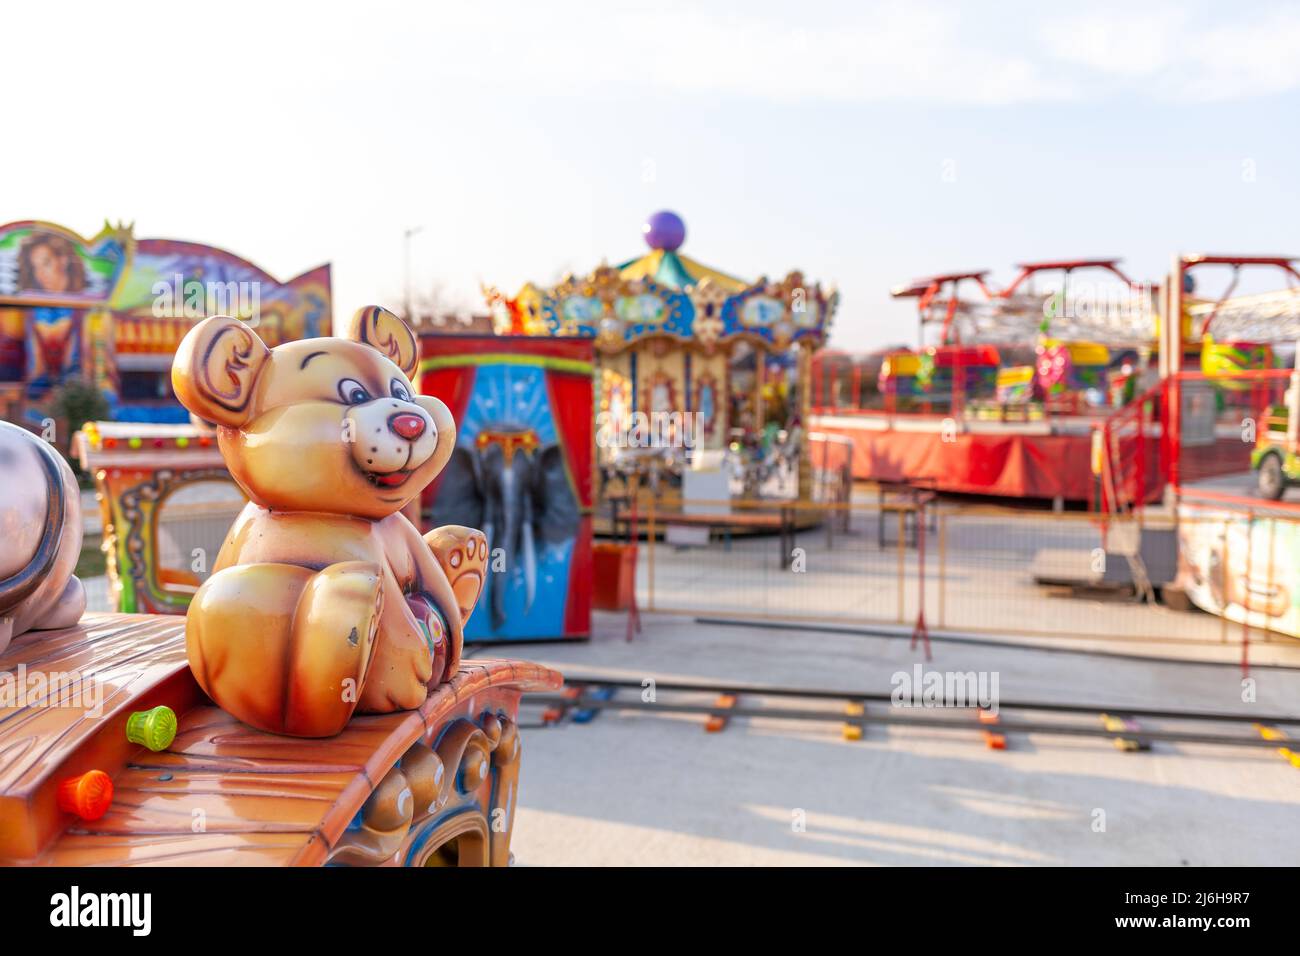 Children's rides and carousels are closed and empty. Joy and entertainment for children. Bright carousels and carriages for transporting children are Stock Photo